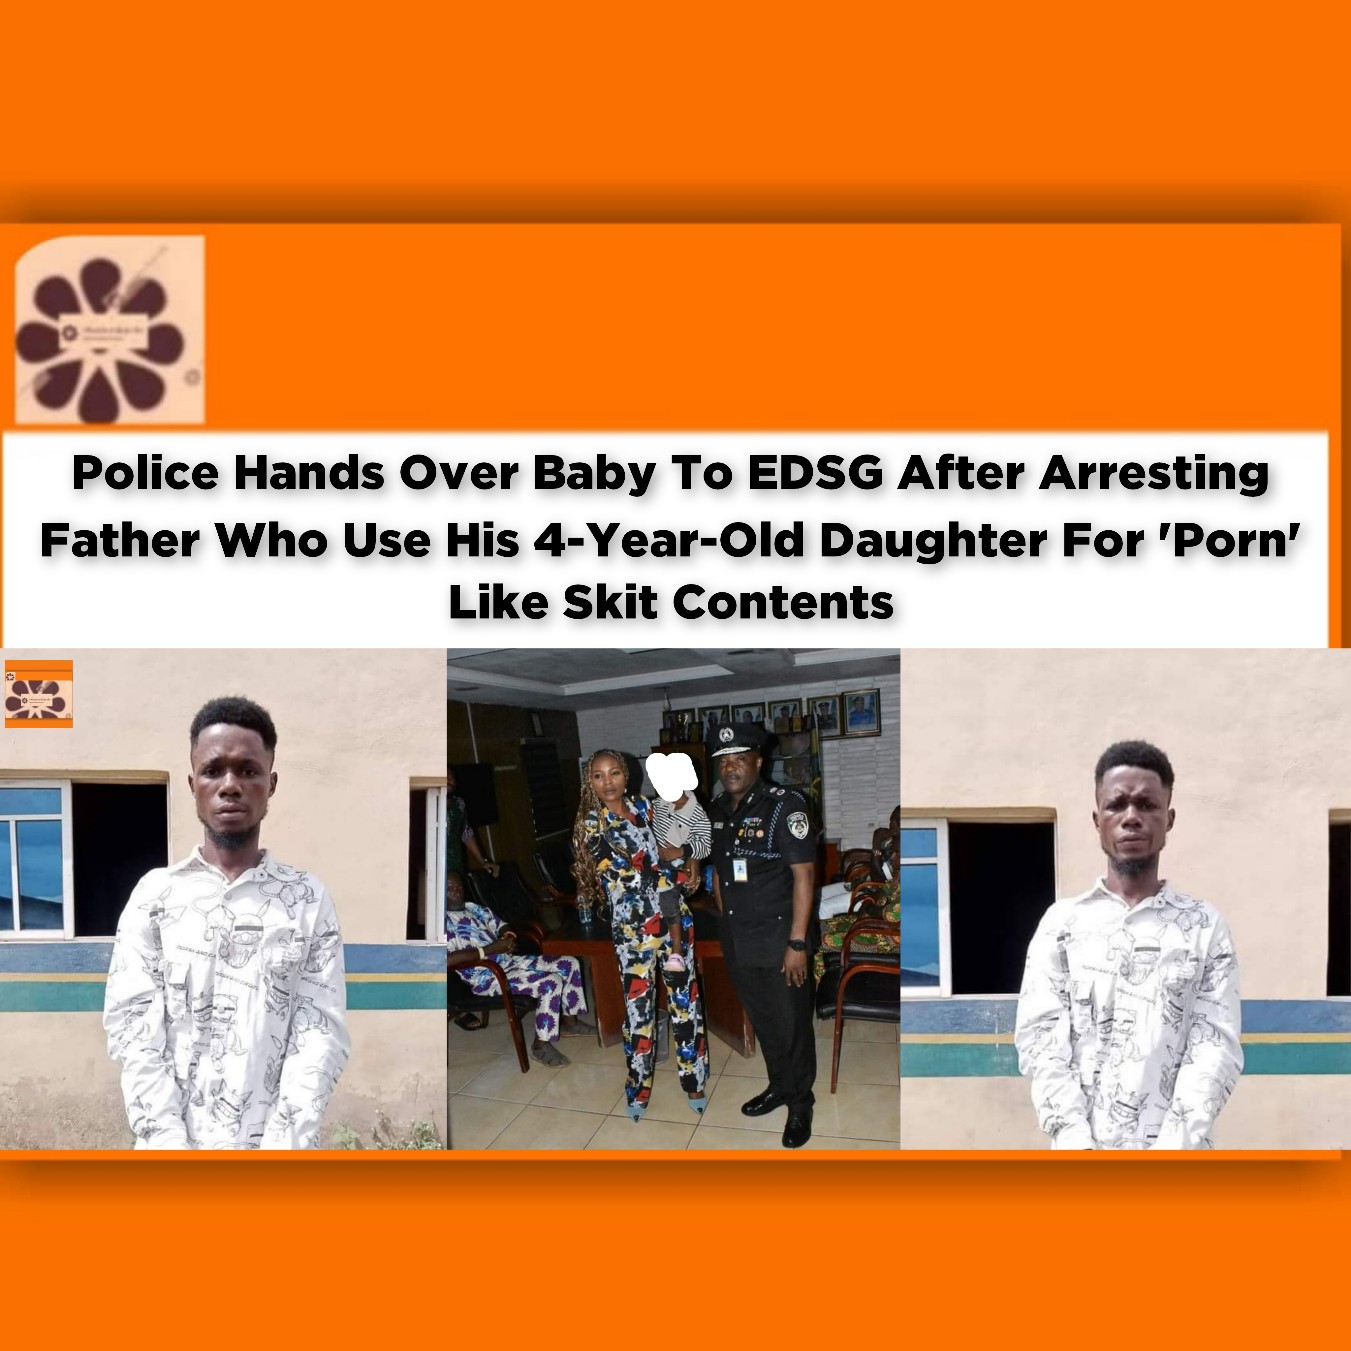 Police Hands Over Baby To EDSG After Arresting Father Who Use His 4-Year-Old Daughter For 'Porn' Like Skit Contents ~ OsazuwaAkonedo #PEPC